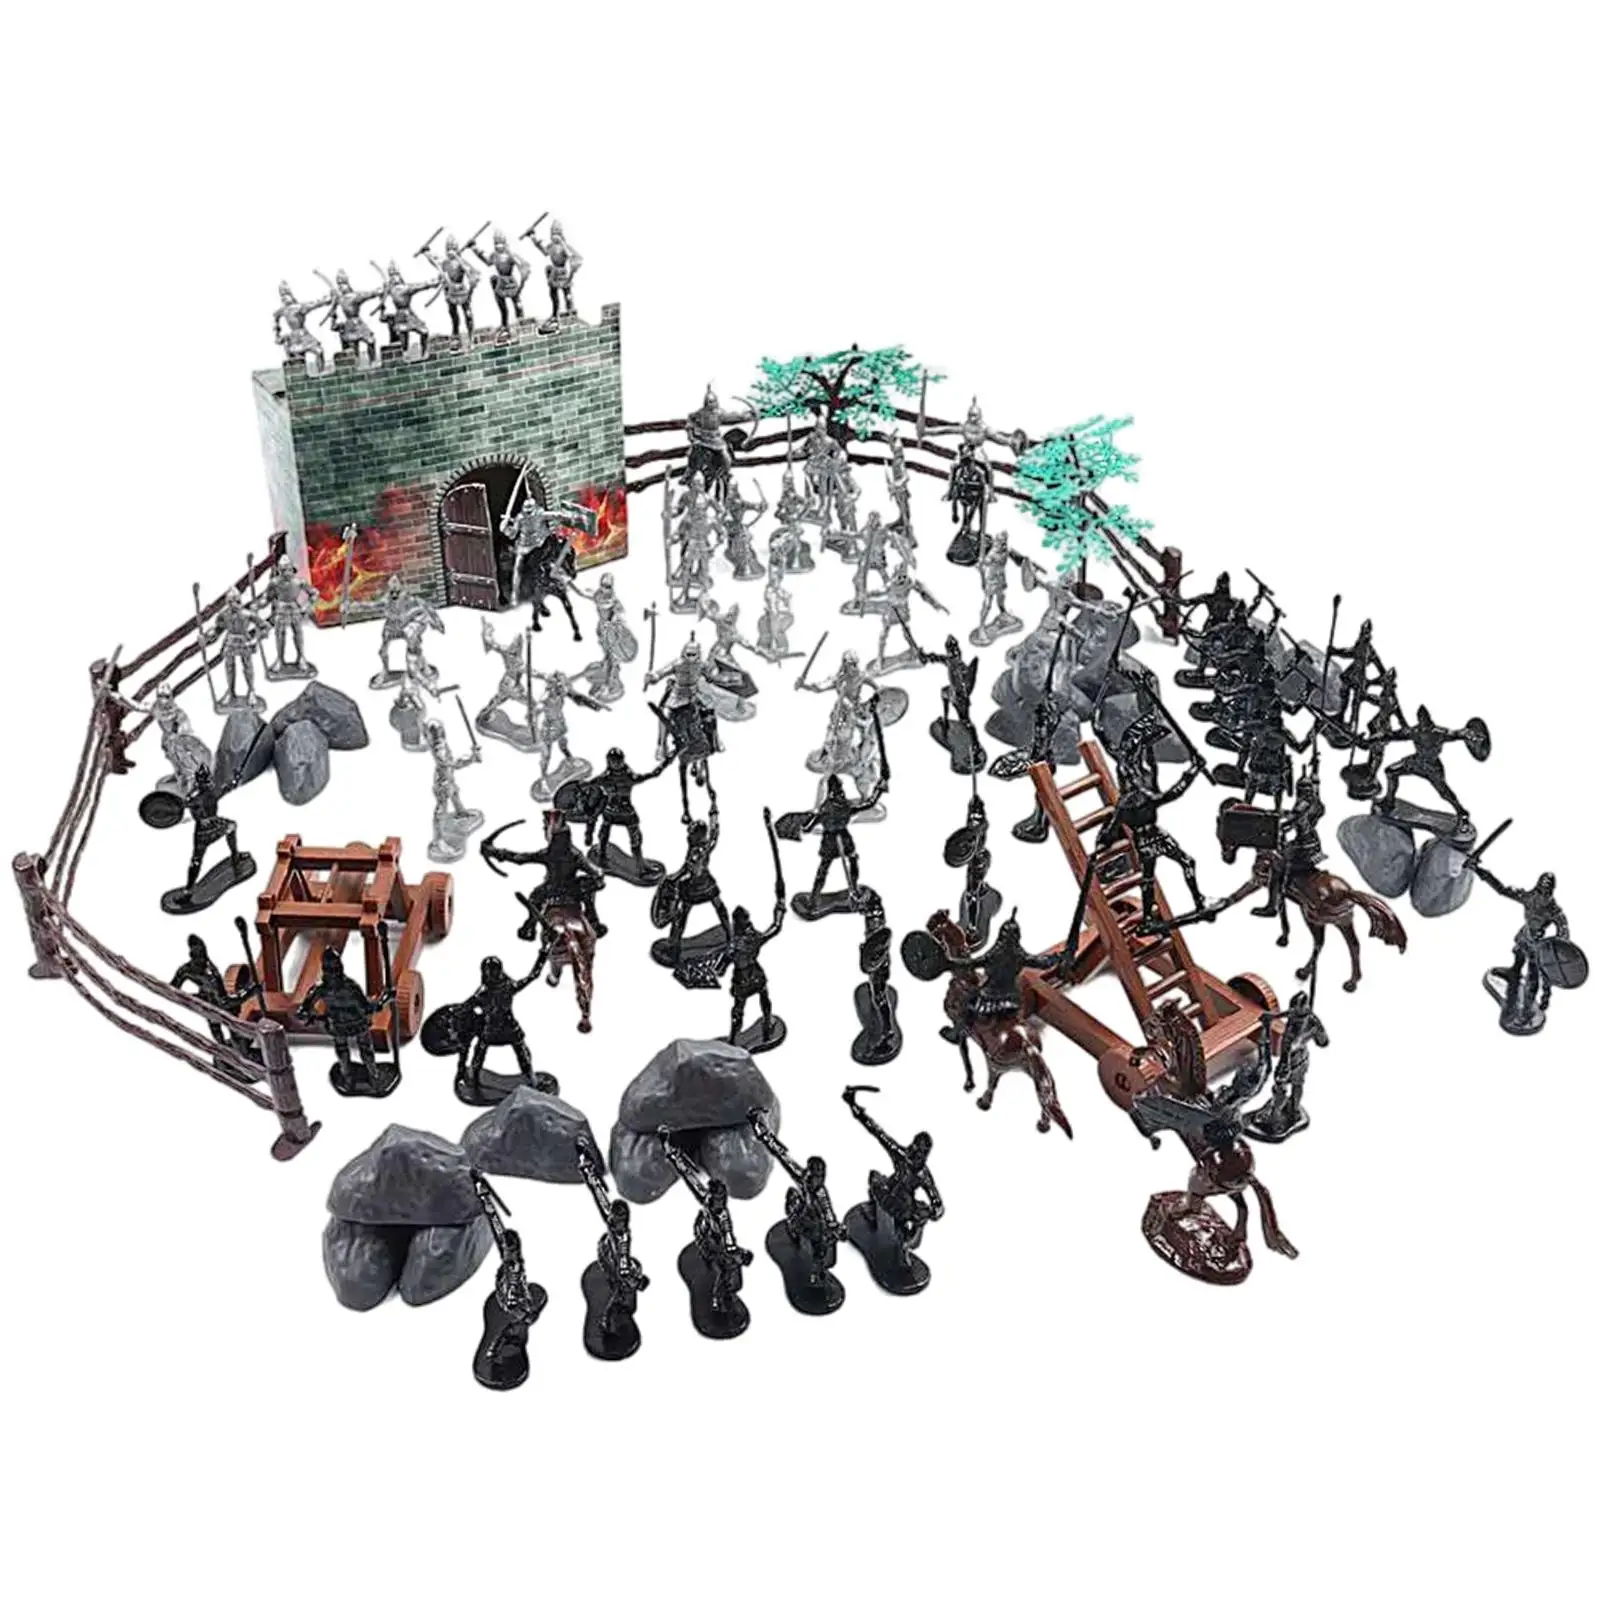 Set of 120 Medieval Knight Soldier Toys Birthday Gifts for Kids Children